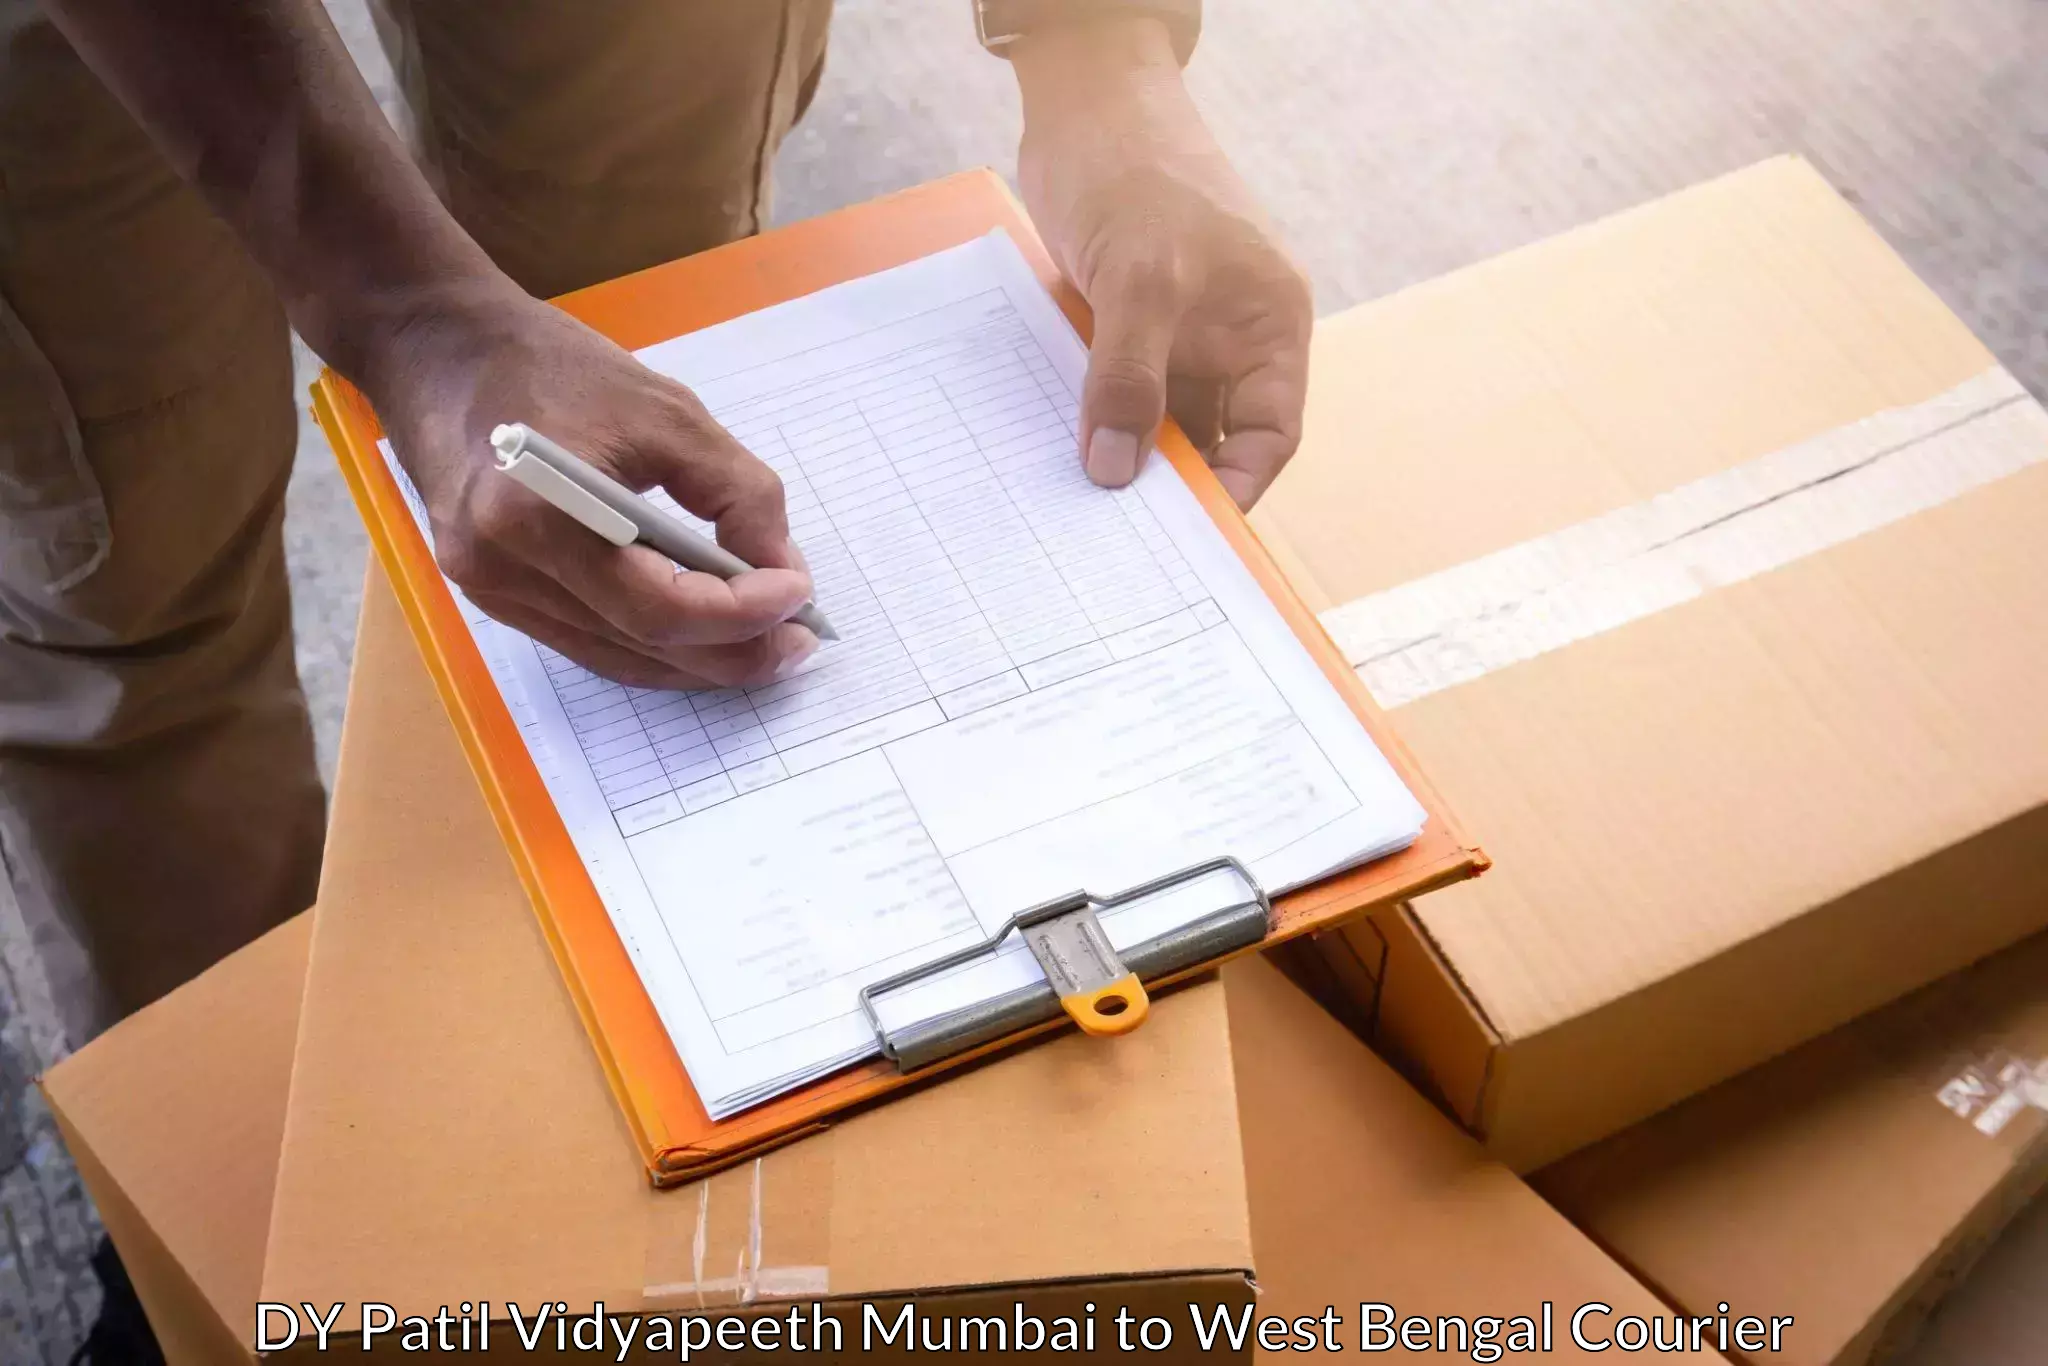 Affordable logistics services DY Patil Vidyapeeth Mumbai to West Bengal